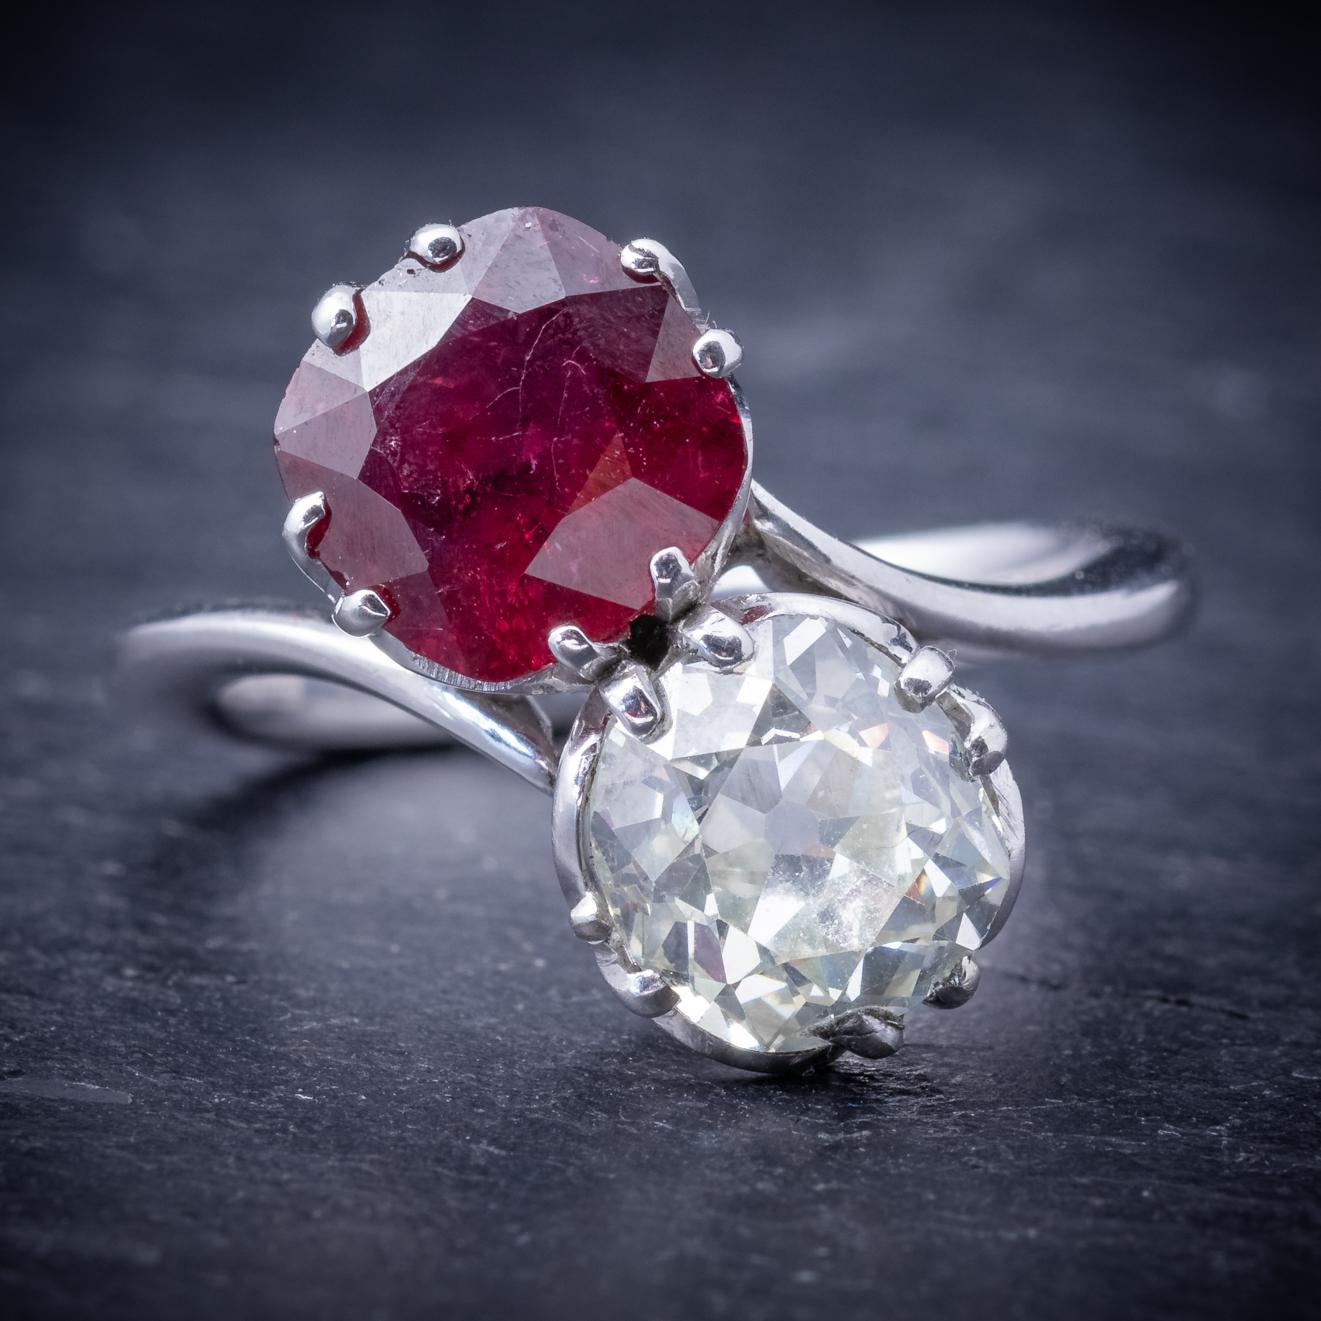 A stunning antique Edwardian ring C. 1915, adorned with a beautiful 2.50ct Ruby and accompanied by a 2.35ct old cut Diamond. 

The Diamond is a wonderful SI1 clarity – I colour stone and compliments the dark red Ruby beautifully. 

The gallery is